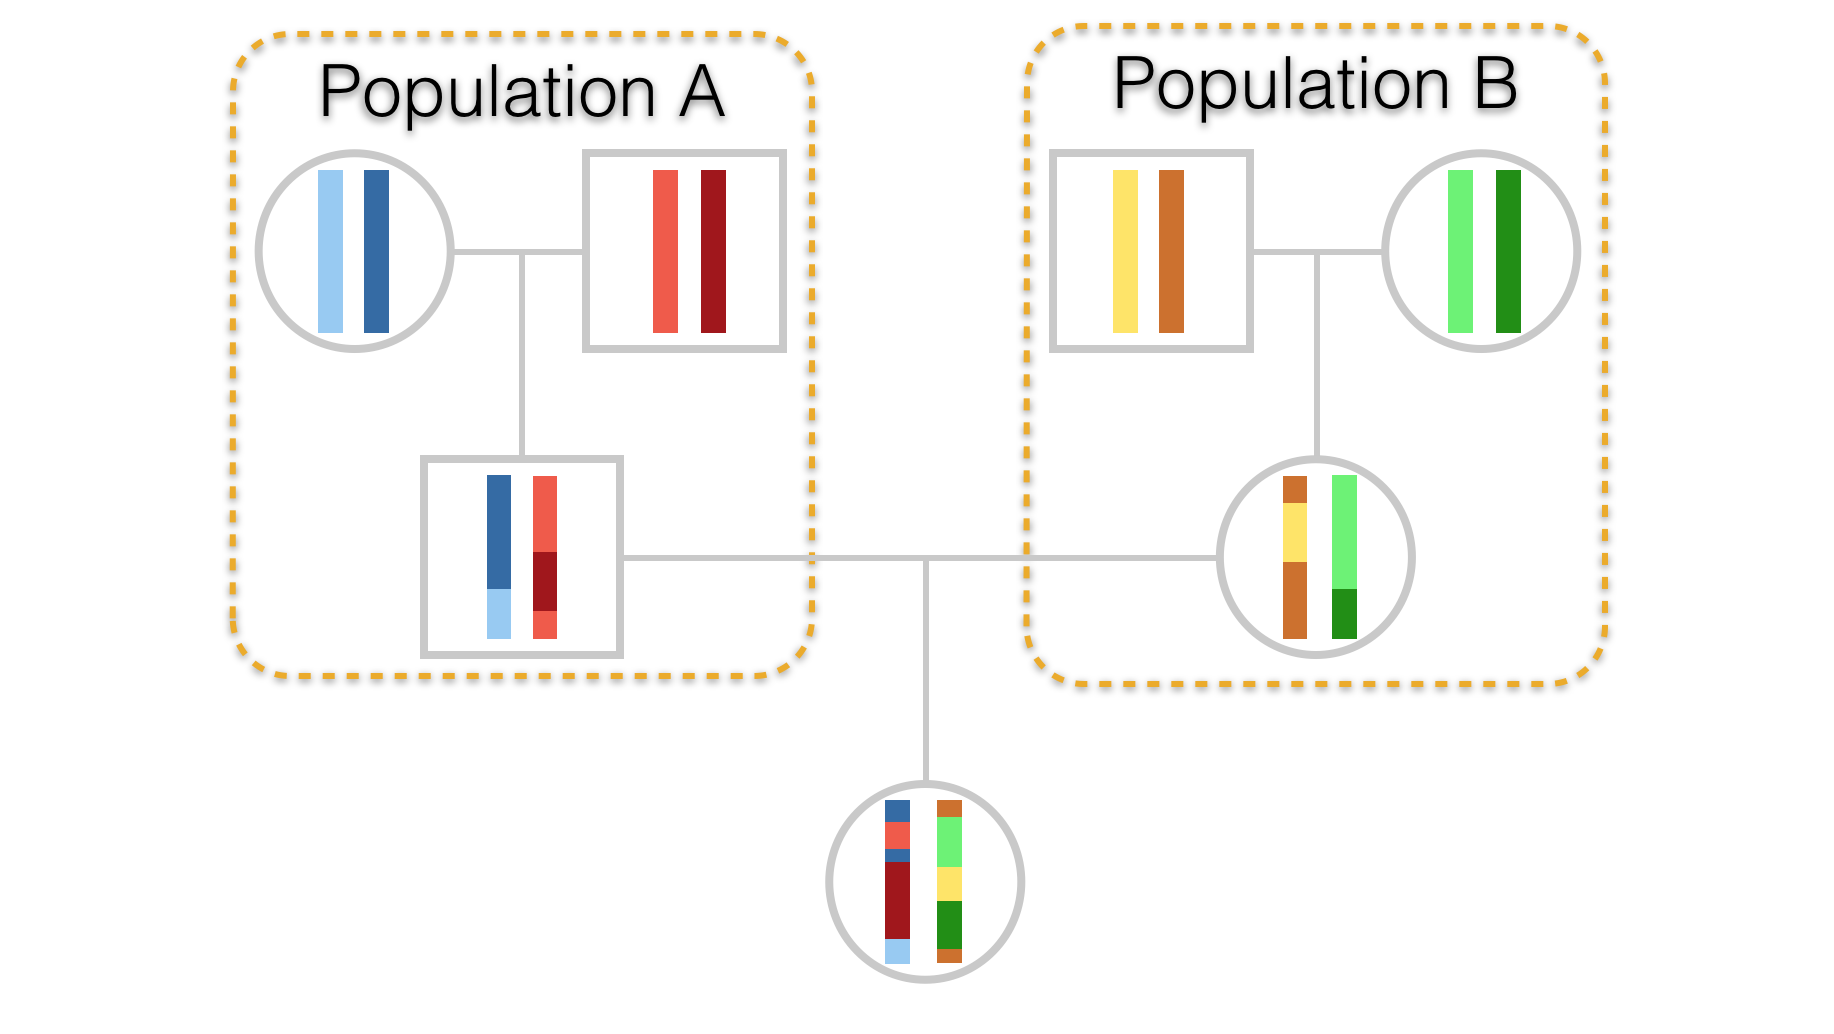 Hypothetical pedigree of an individual whose parents come from two separate populations.  Stretches of chromosome are depicted in differing colors to highlight parentage as well as demonstrate admixture in the offspring.